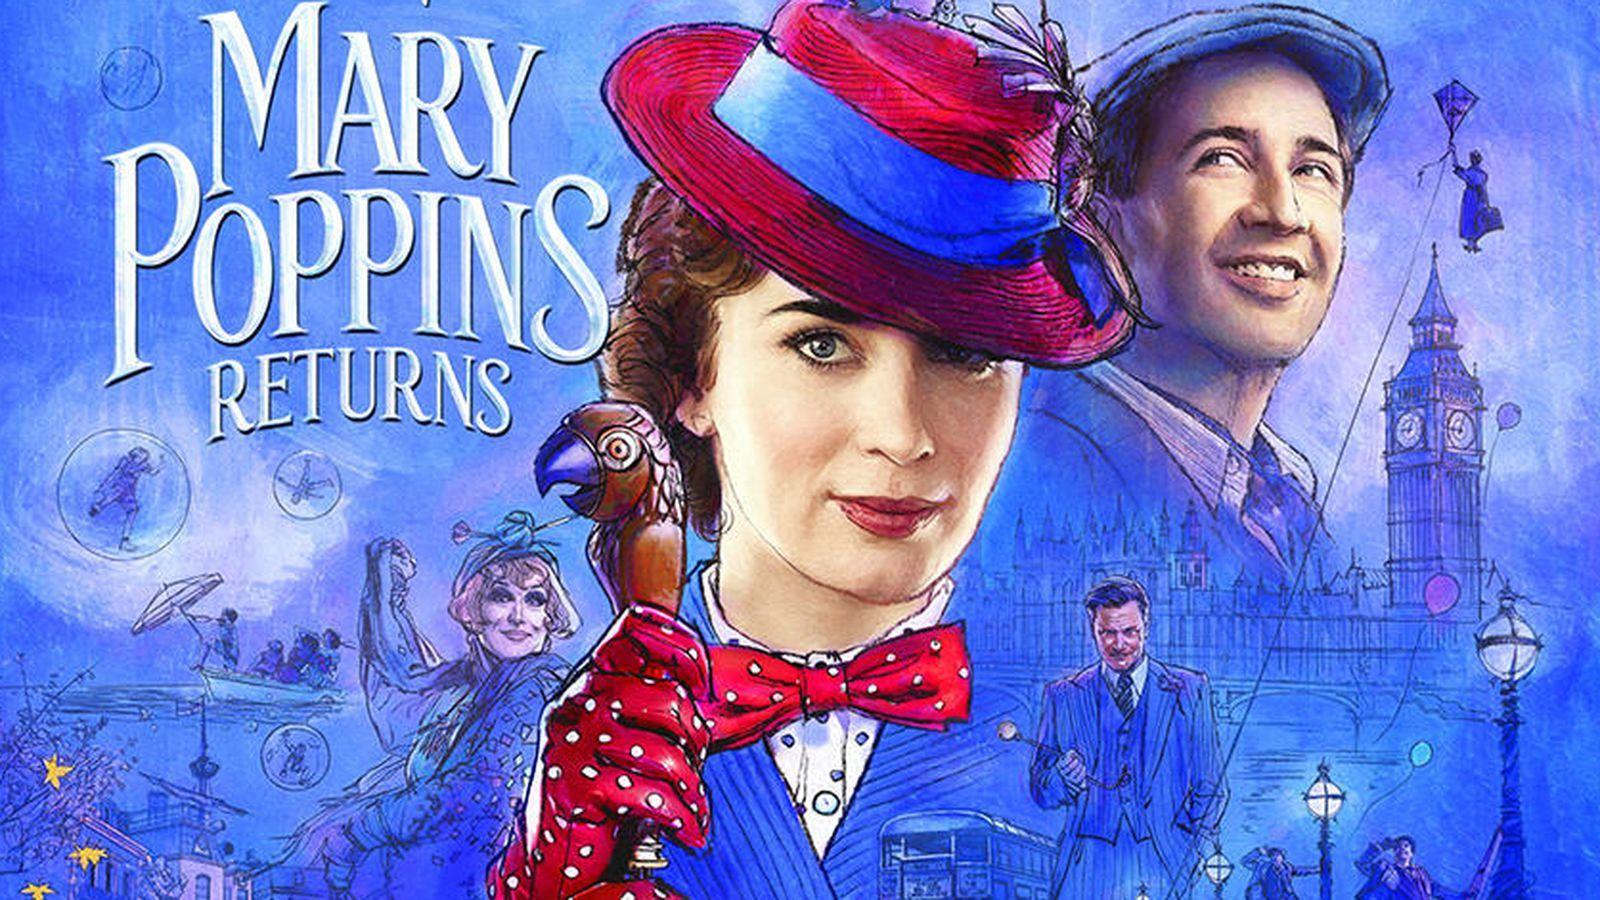 Mary Poppins Returns Trailer Flies In With Old Fashioned Animation